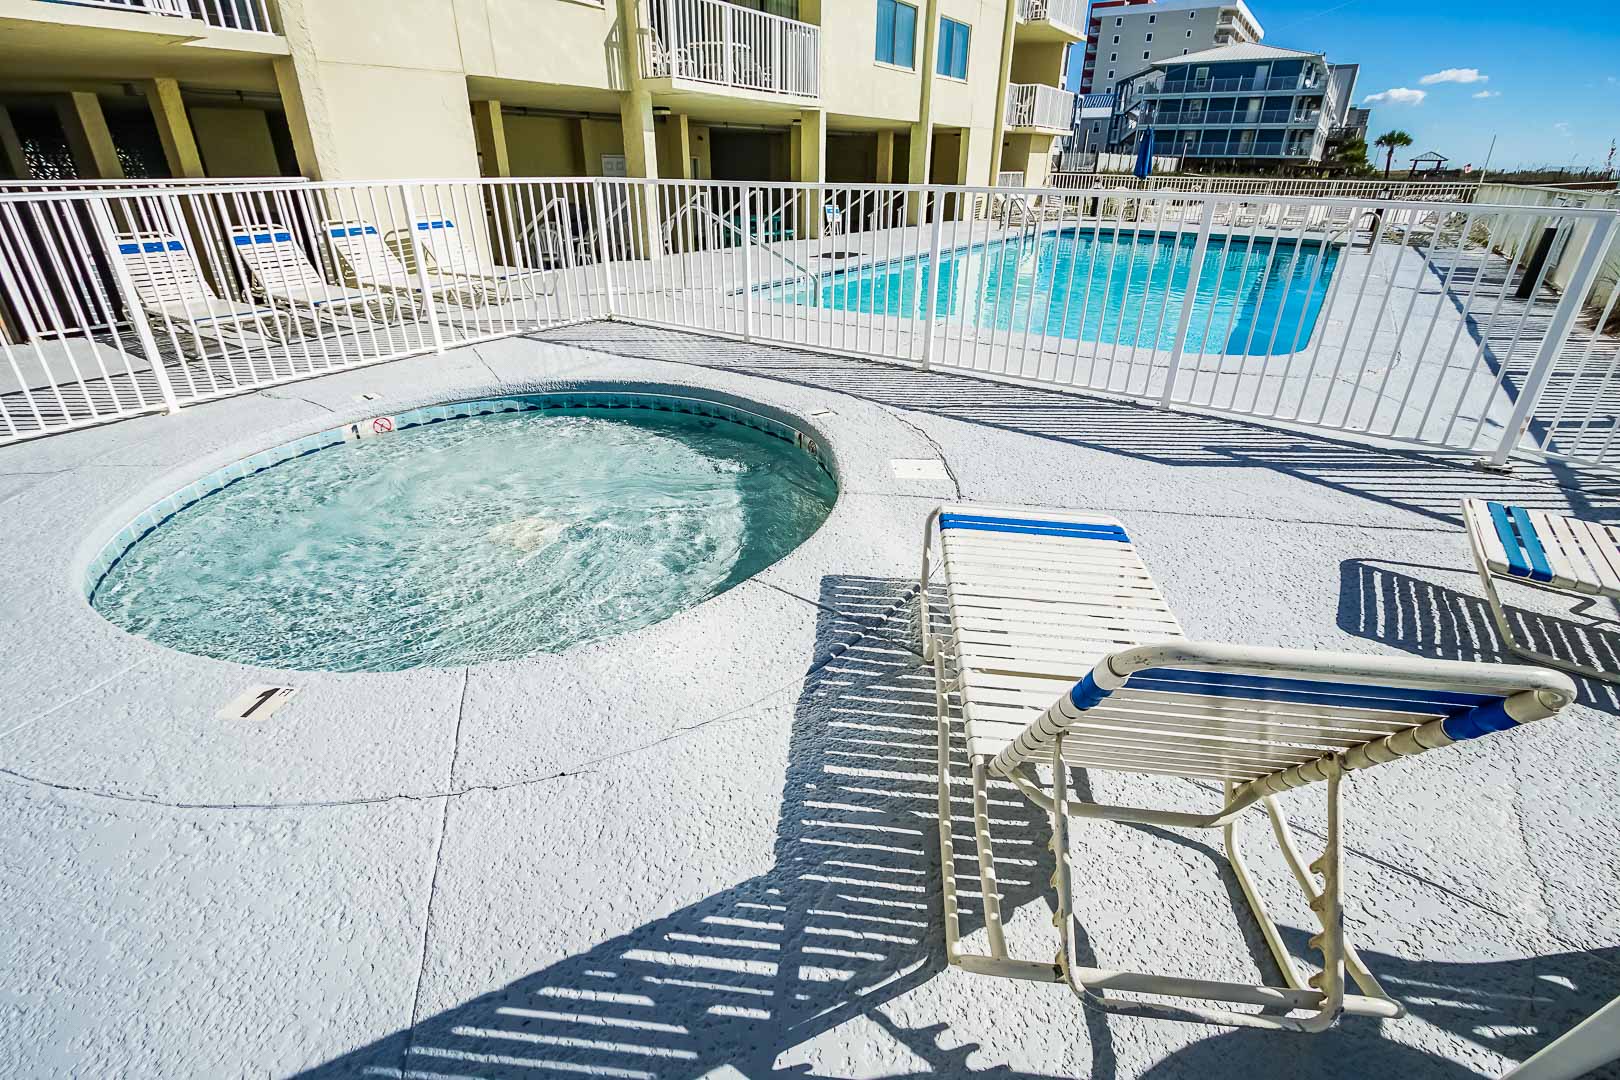 A peaceful outdoor swimming pool and Jacuzzi at VRI's Shoreline Towers in Gulf Shores, Alabama.